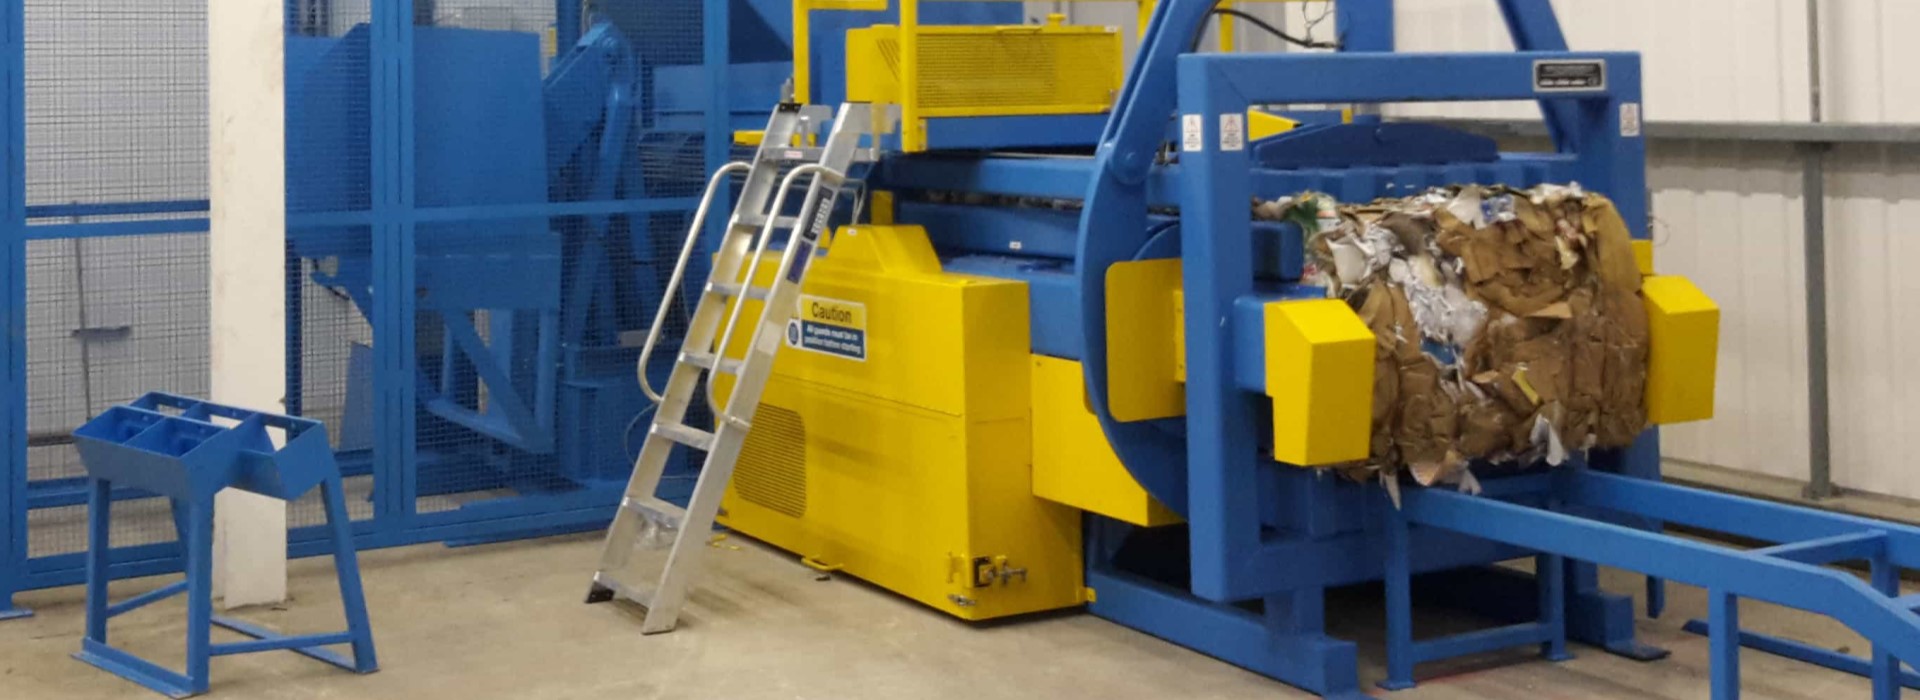 Baler or Compactor – Which One Do You Need?